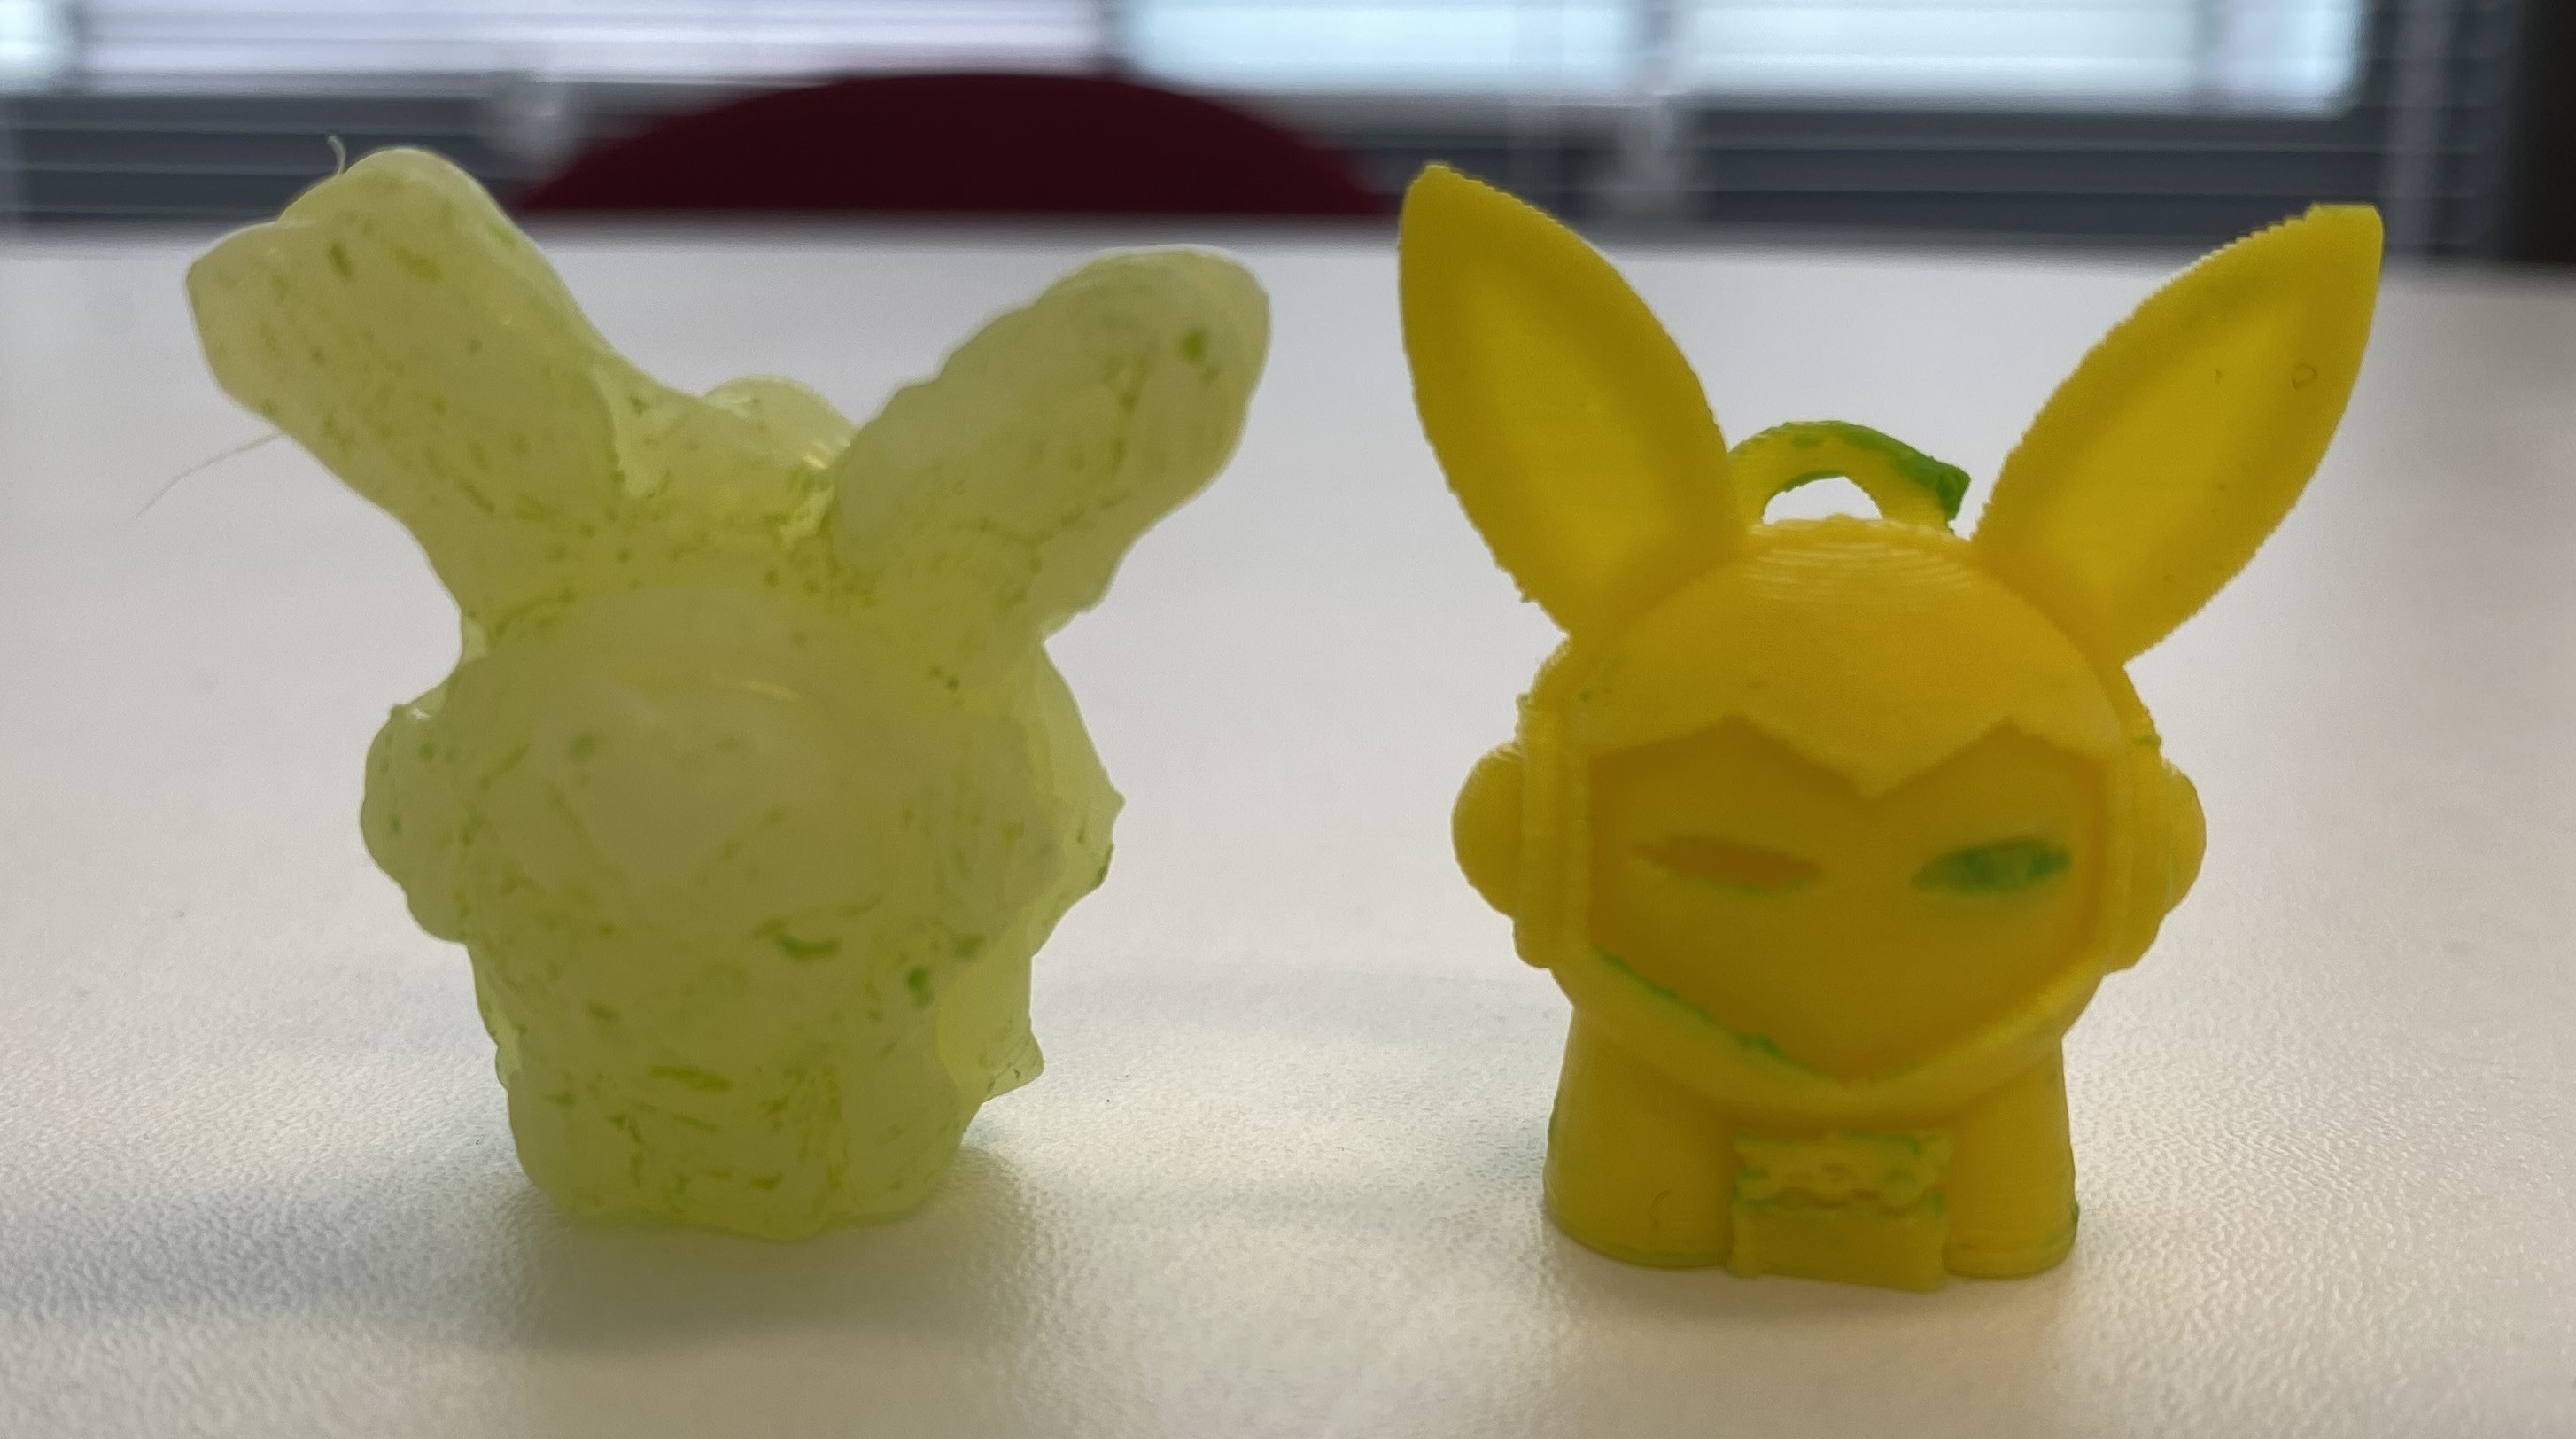 3d printed yellow rabbit next toy next to the toy version made out of glue using the mould